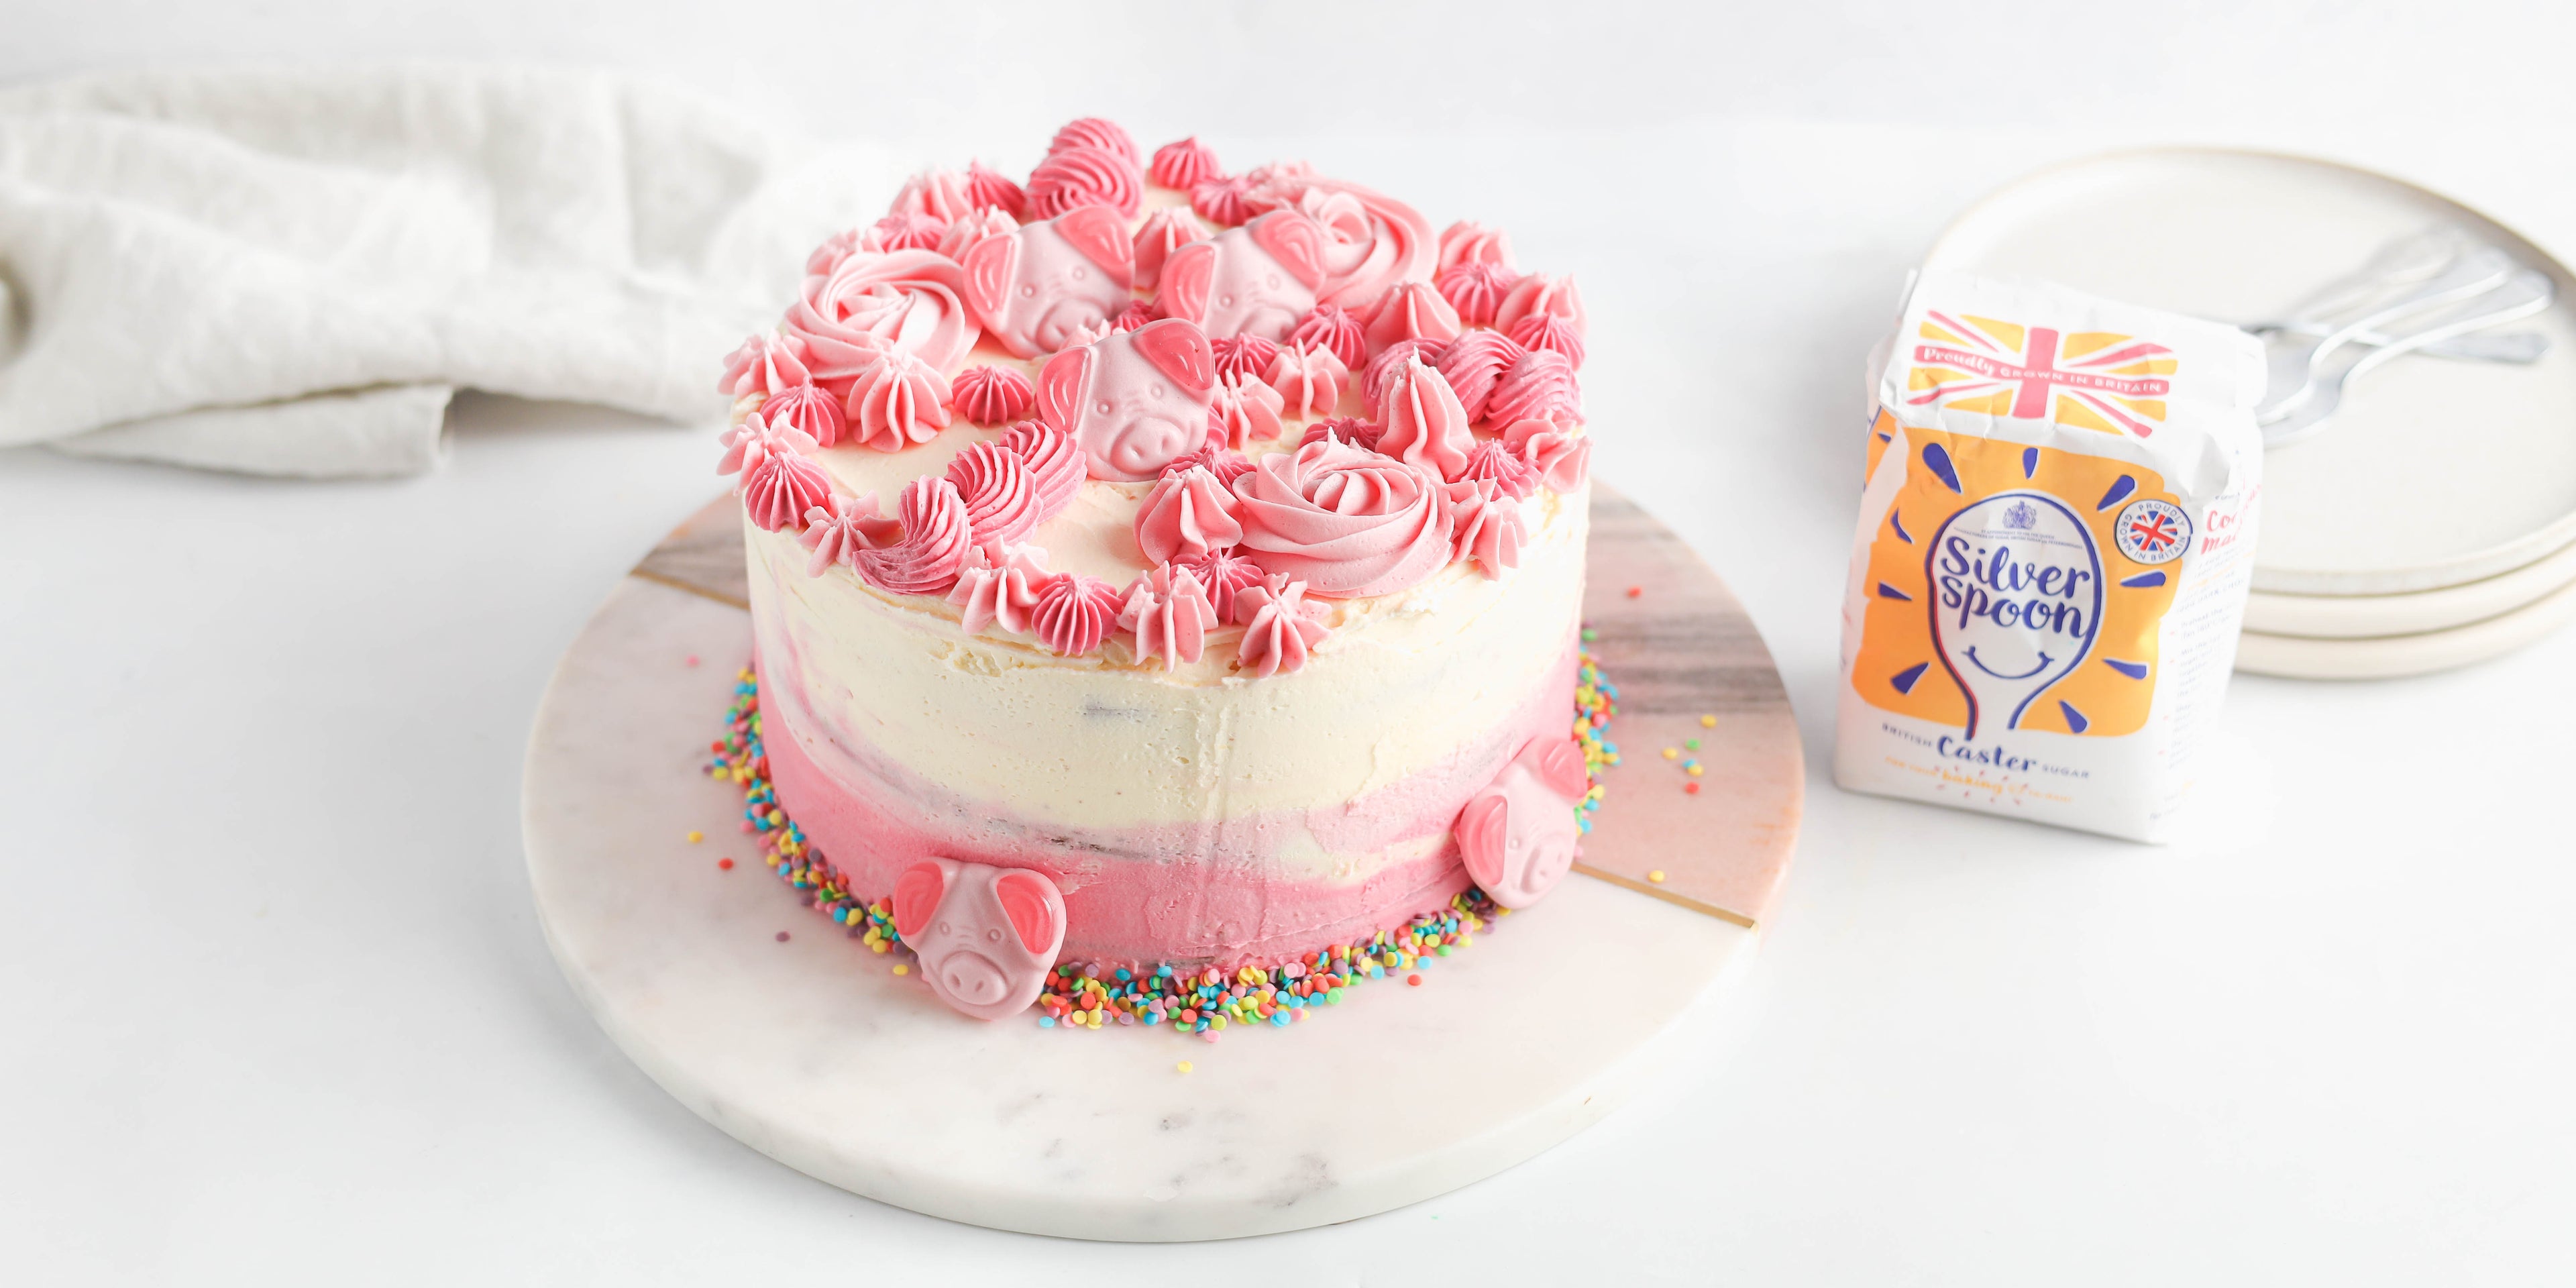 Percy Pig Marble Cake decorated with pink buttercream and percy pig sweets, next to a bag of Silver Spoon caster sugar